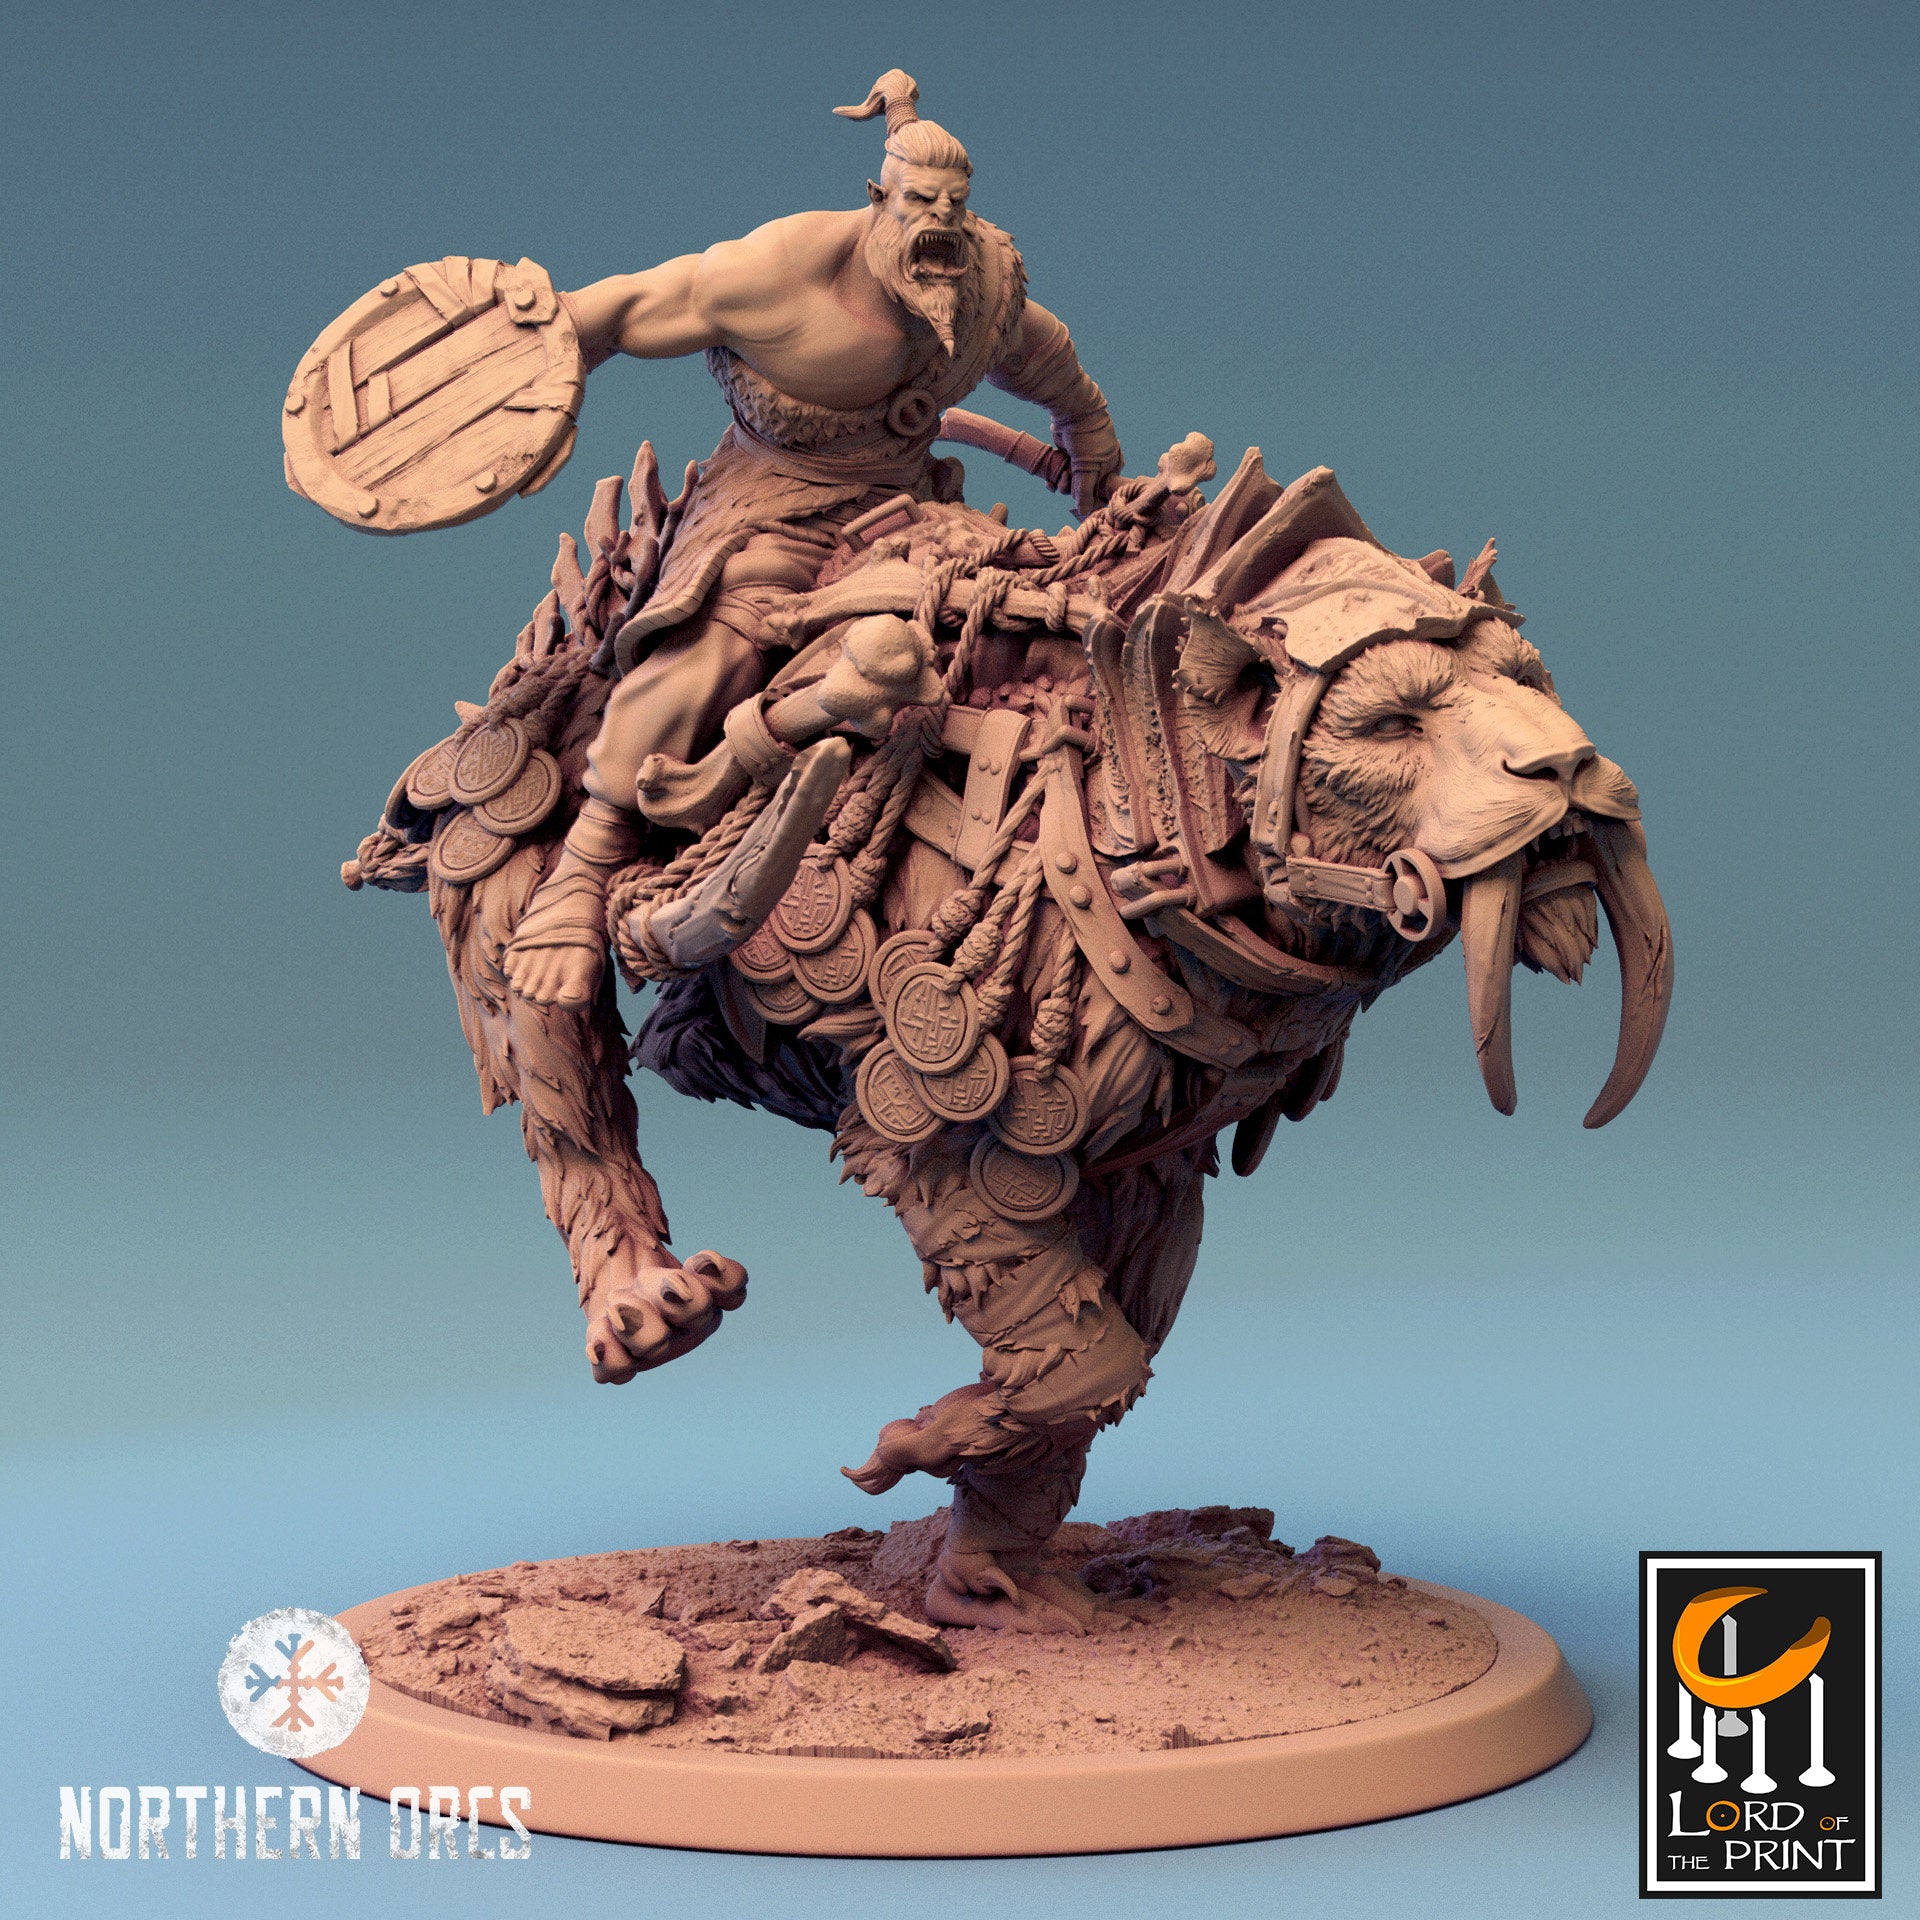 Northern Orcs, Mounted Gelidus Felix by Lord of the Print | Please Read Description